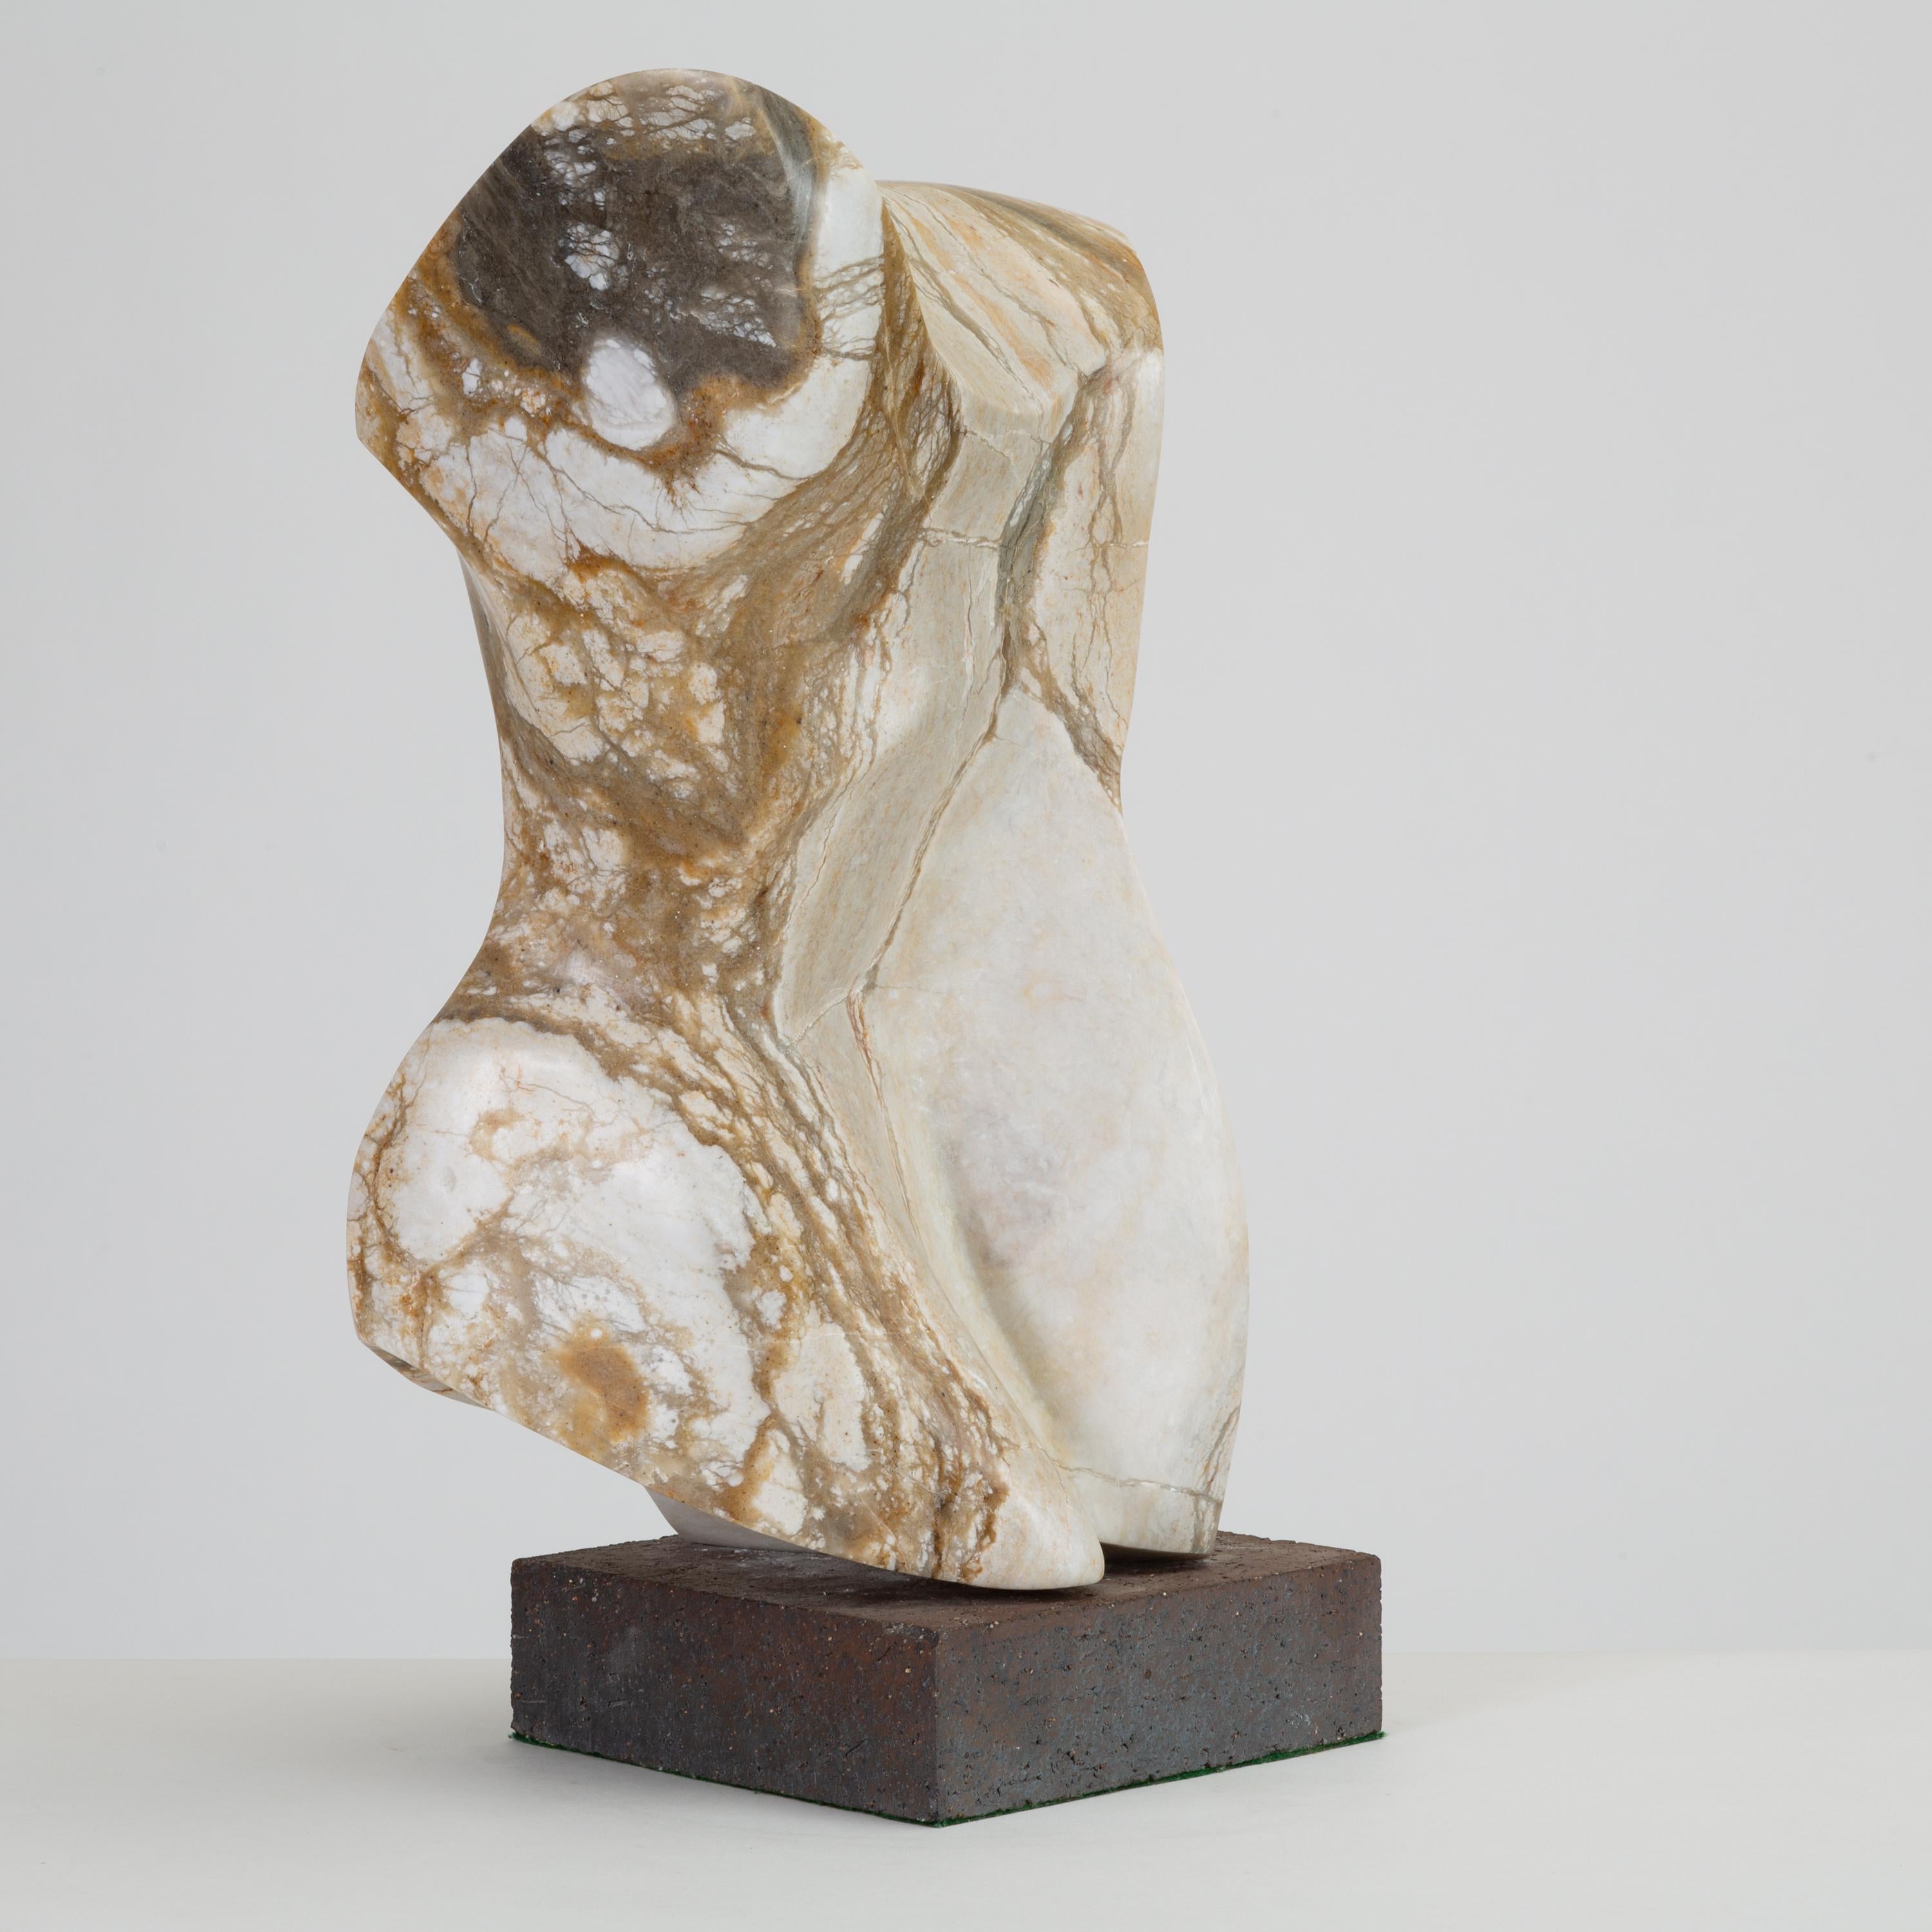 A spectacularly veined gray marble sculpture, touched with notes of ochre and cinnamon. The abstracted form, mounted on a gray brick base, recalls a Greek or Roman torso figure. Signed 